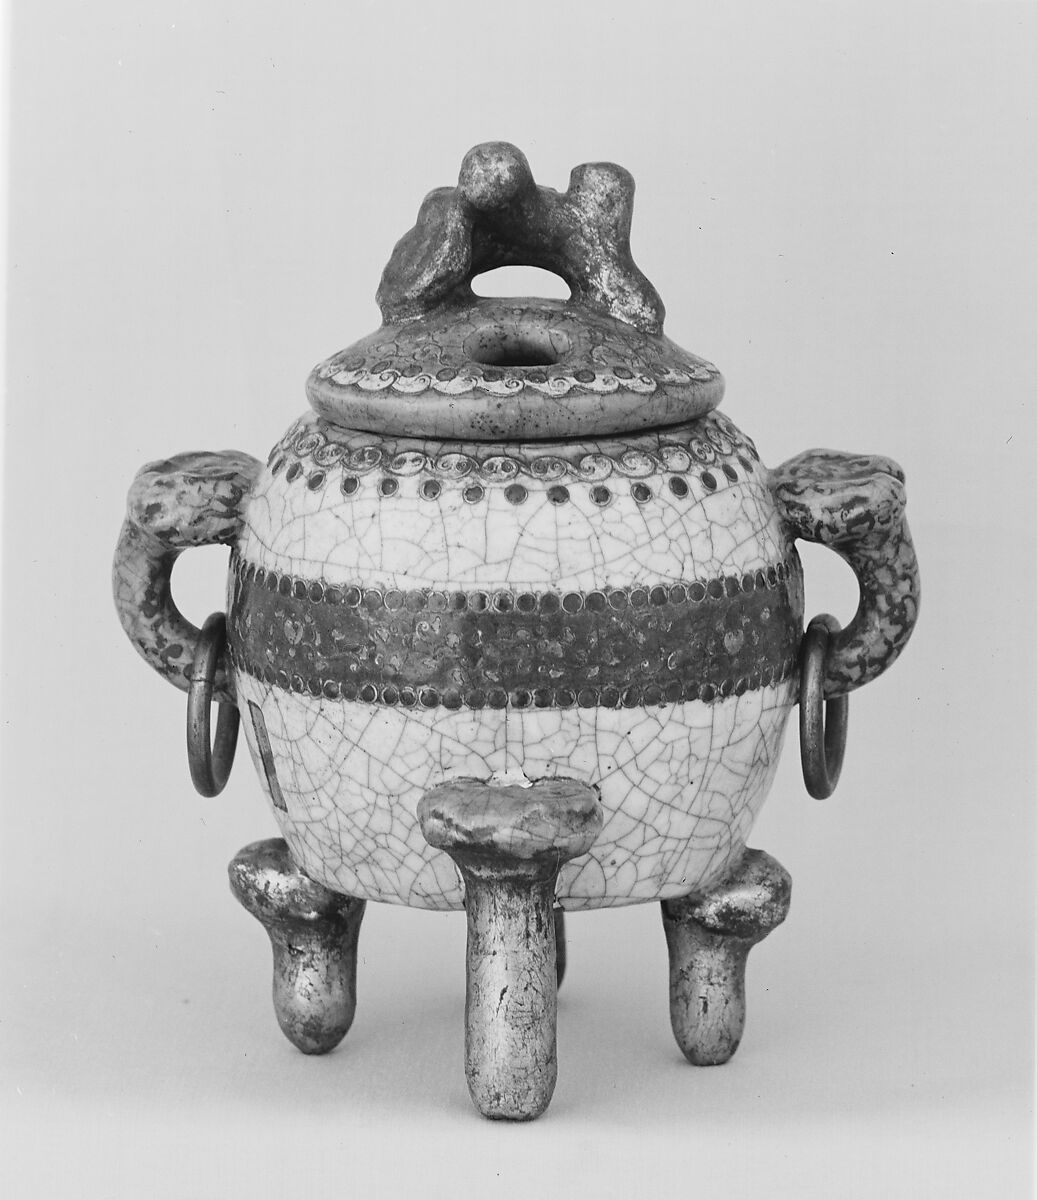 Incense Burner, Pottery covered with crackled glaze, enriched with cloisonné; bronze rings at sides (Kyoto ware), Japan 